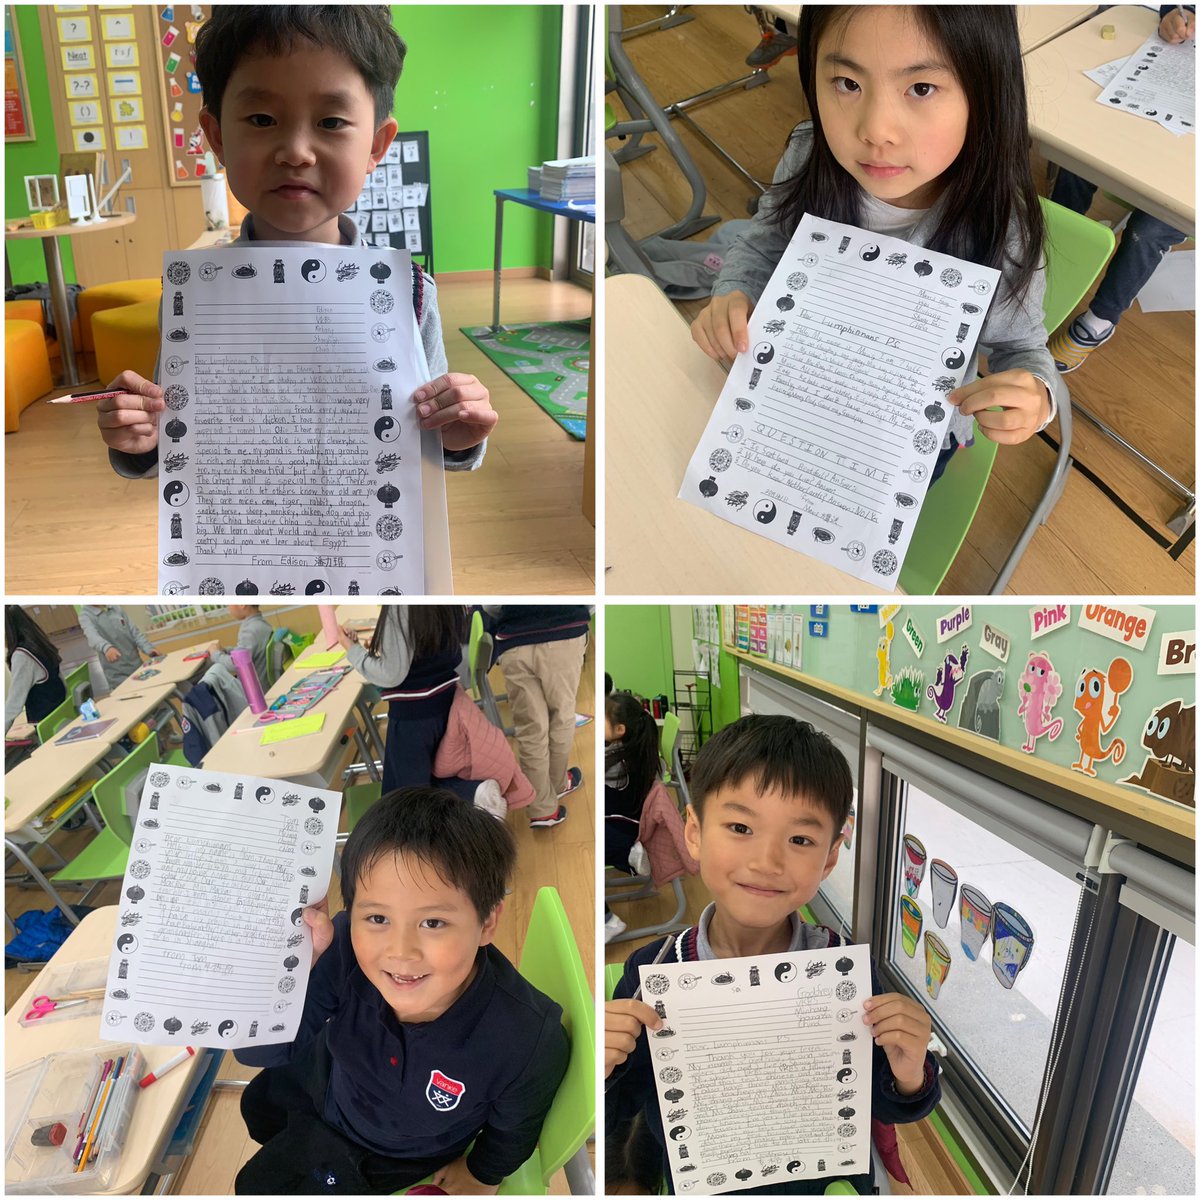 🌟 International Impact🌟 

P4/5 wrote letters to children in Shanghai 🇨🇳 

Today Miss Ferguson delivered the letters and they have written back to the class in Scotland 🏴󠁧󠁢󠁳󠁣󠁴󠁿 

👀Look at the joy on the kids faces! 

#writingforapurpose #internationalconnections #culturalexperiences